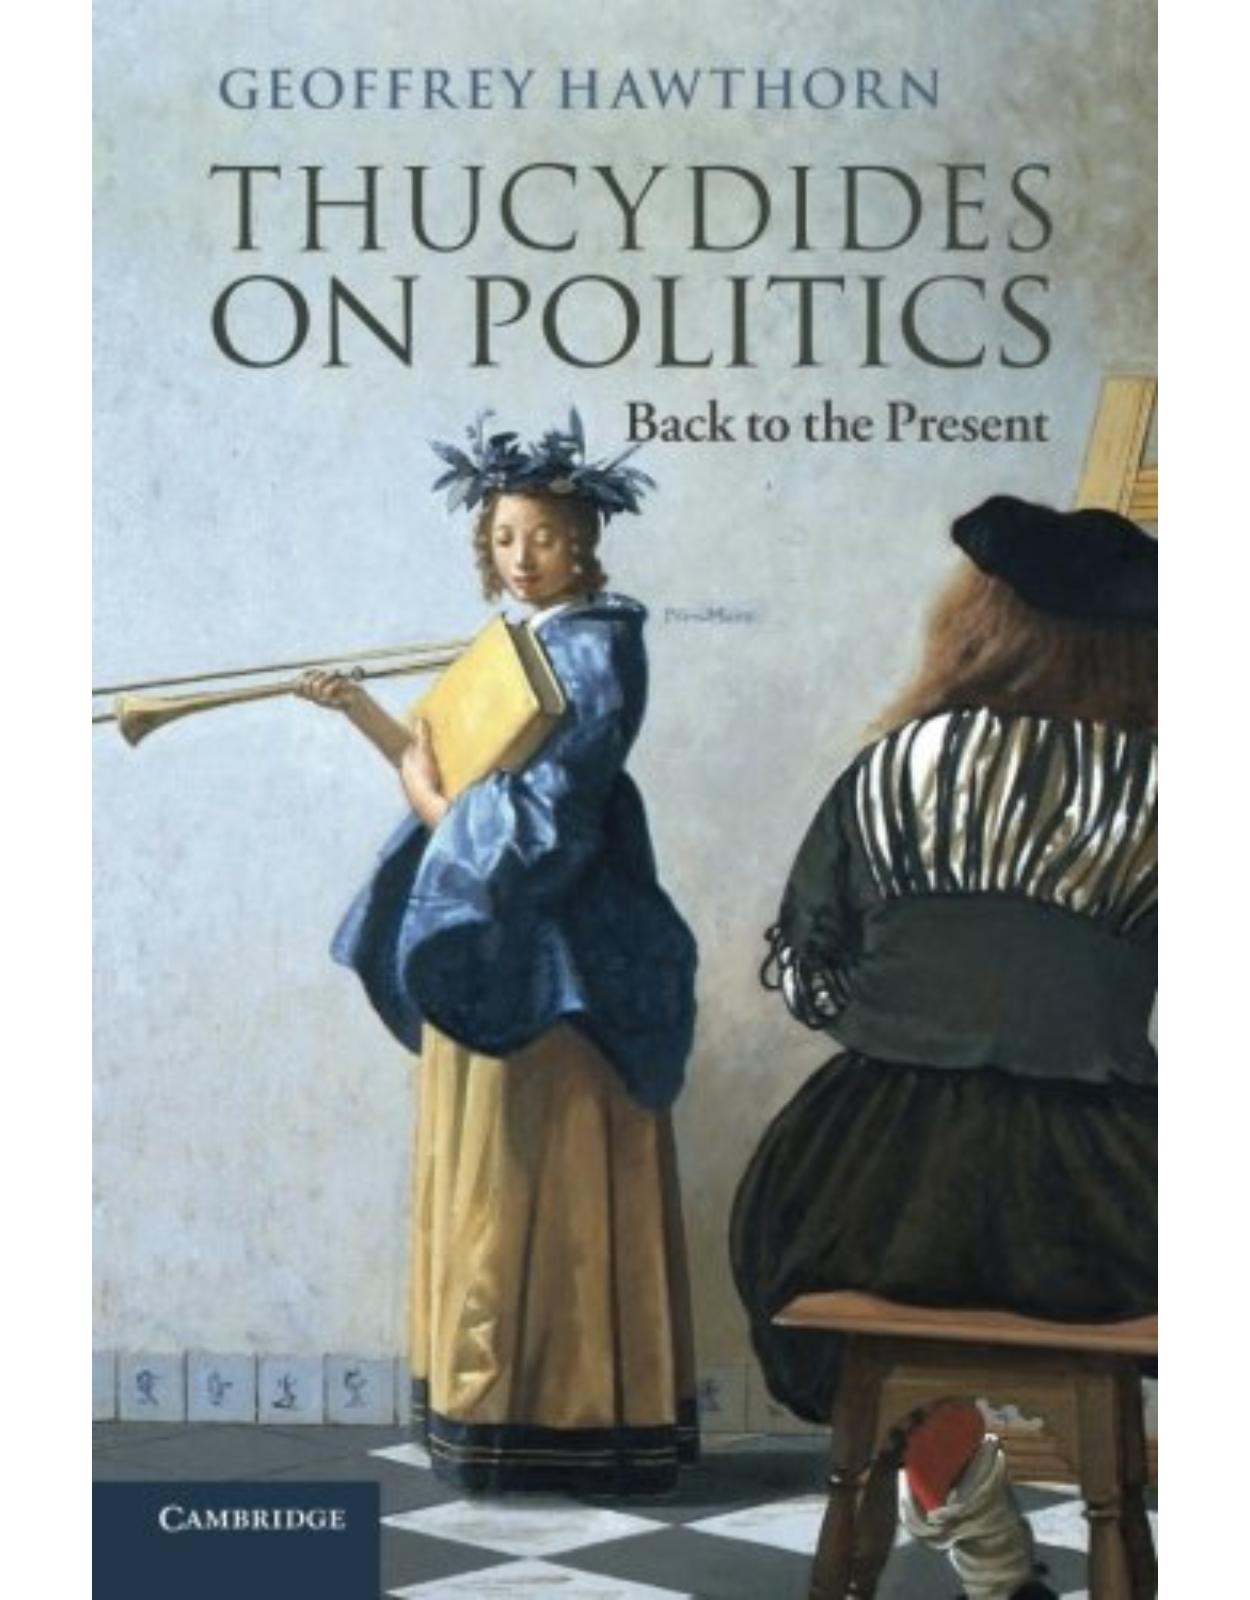 Thucydides on Politics: Back to the Present